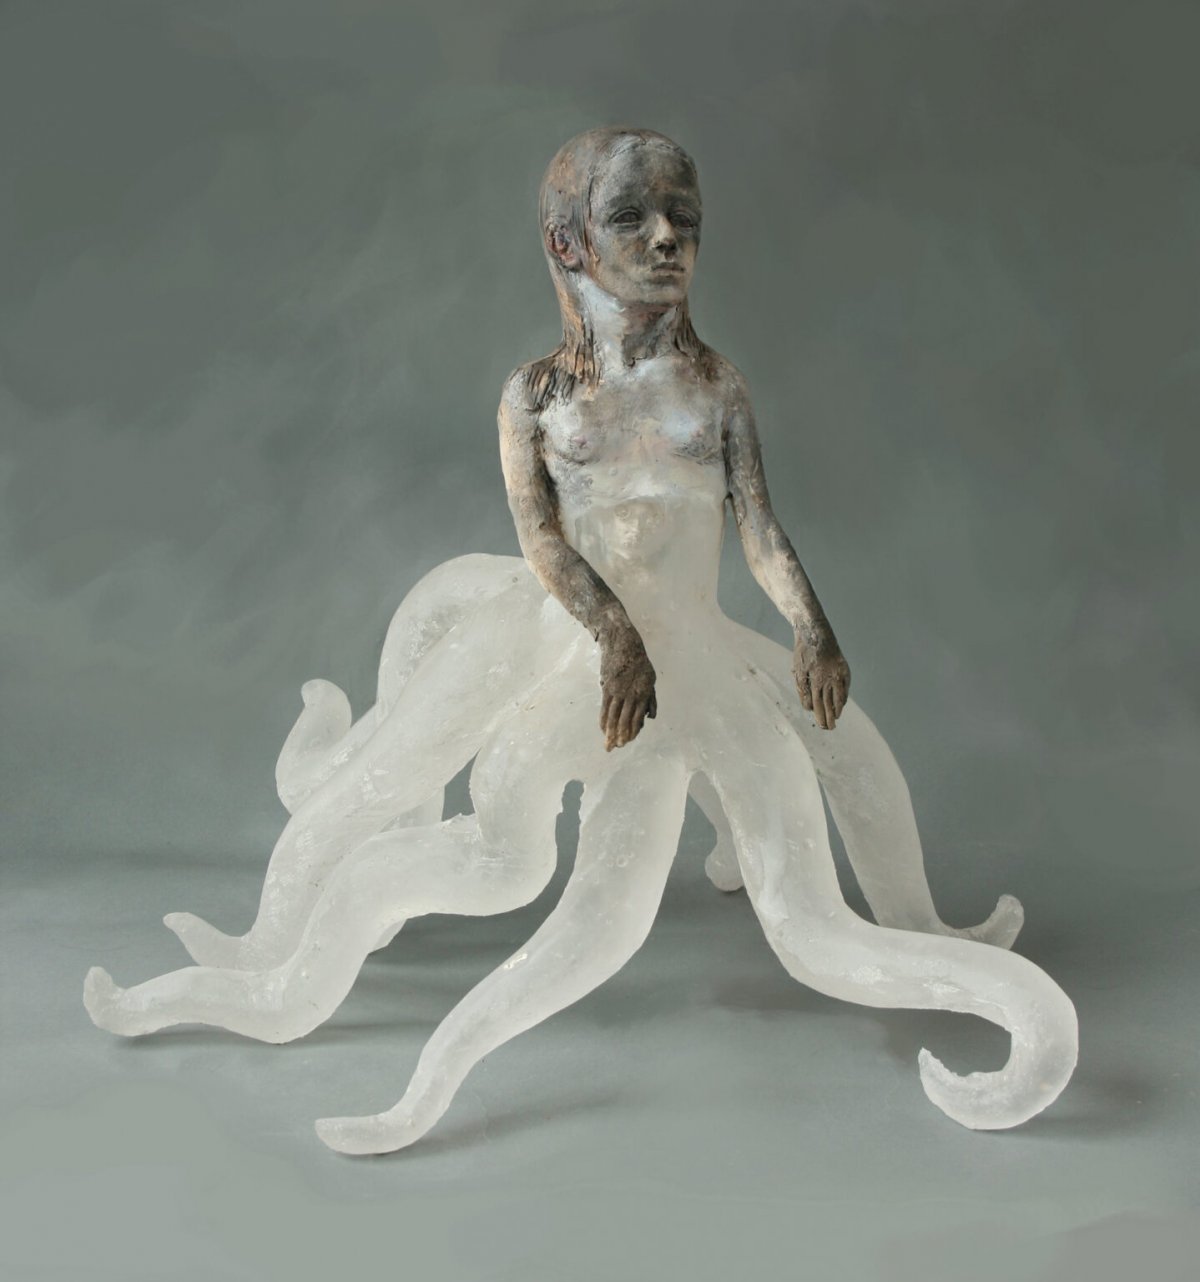 Ethereal Surrealist Sculptures Made Of Translucent Glass And Clay By Christina Bothwell 1